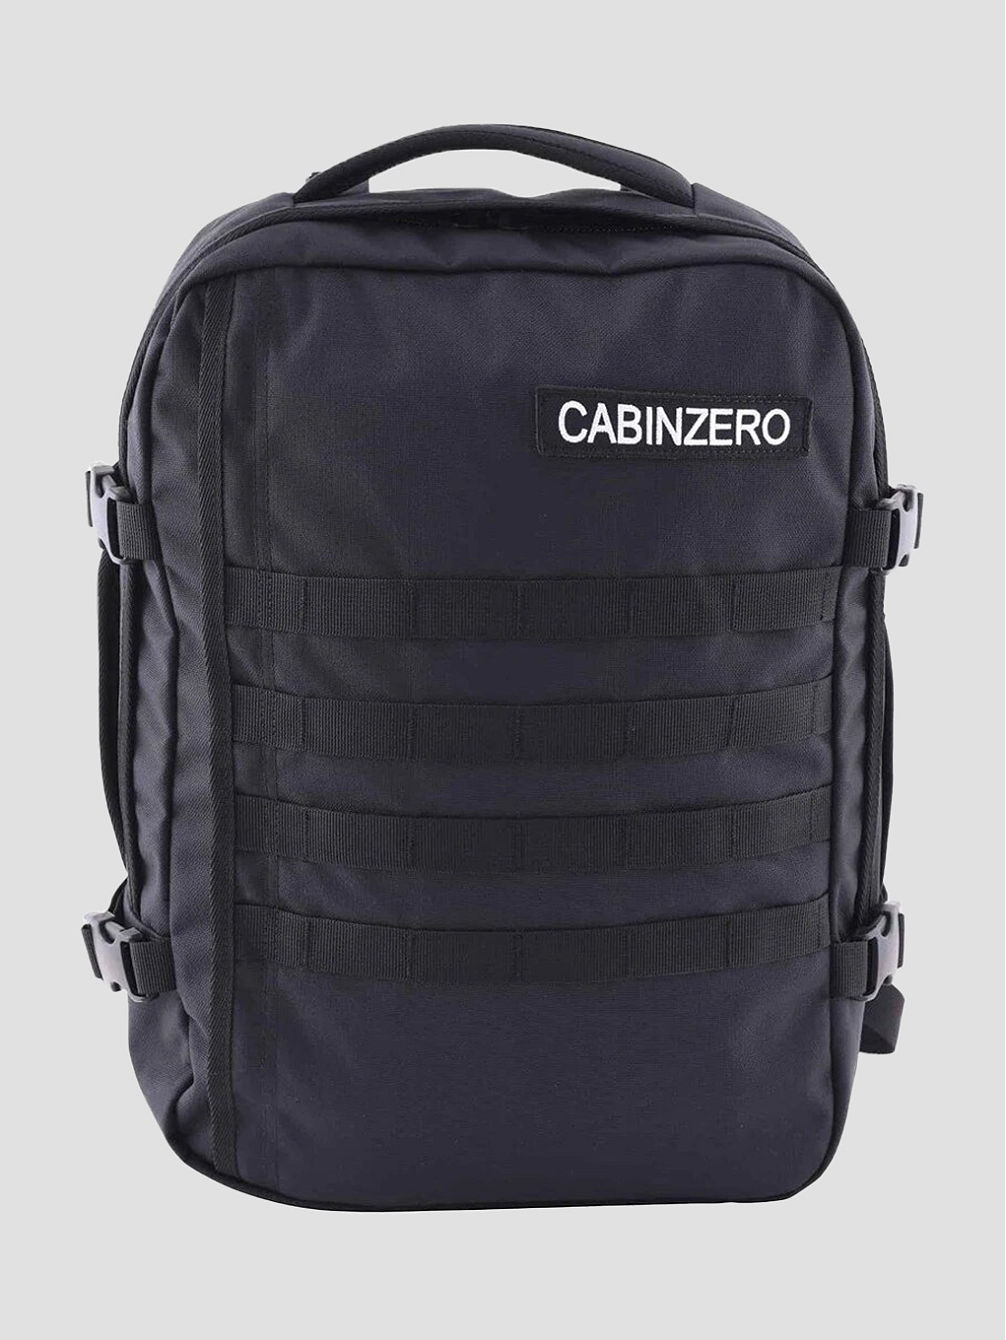 Military 28L Cabin Backpack